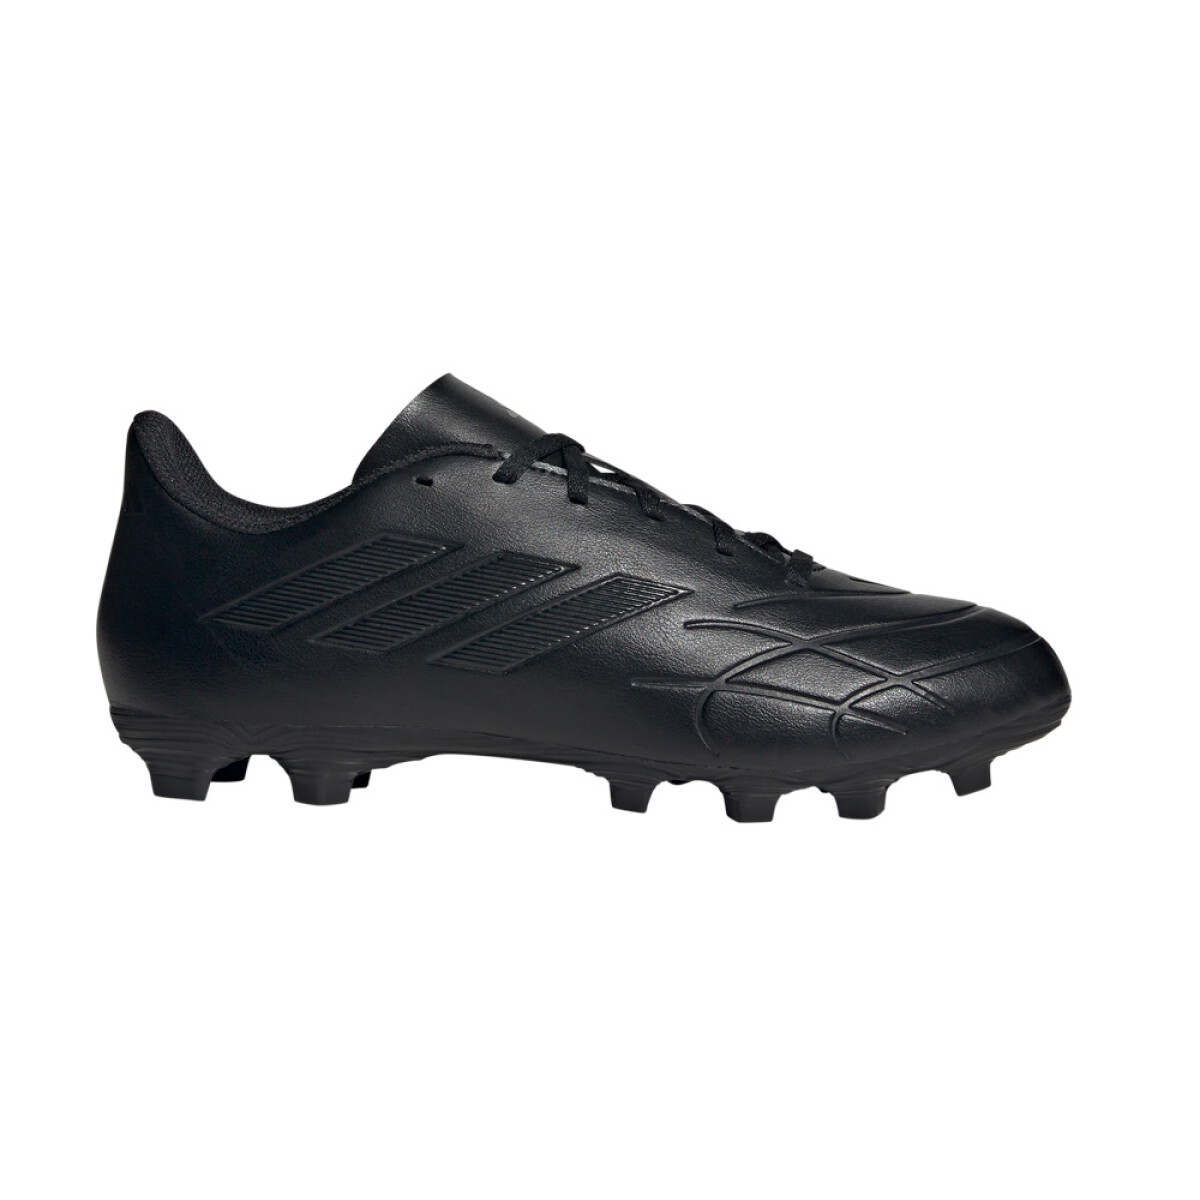 adidas COPA PURE.4 FLEXIBLE GROUND BOOTS - BLACK 